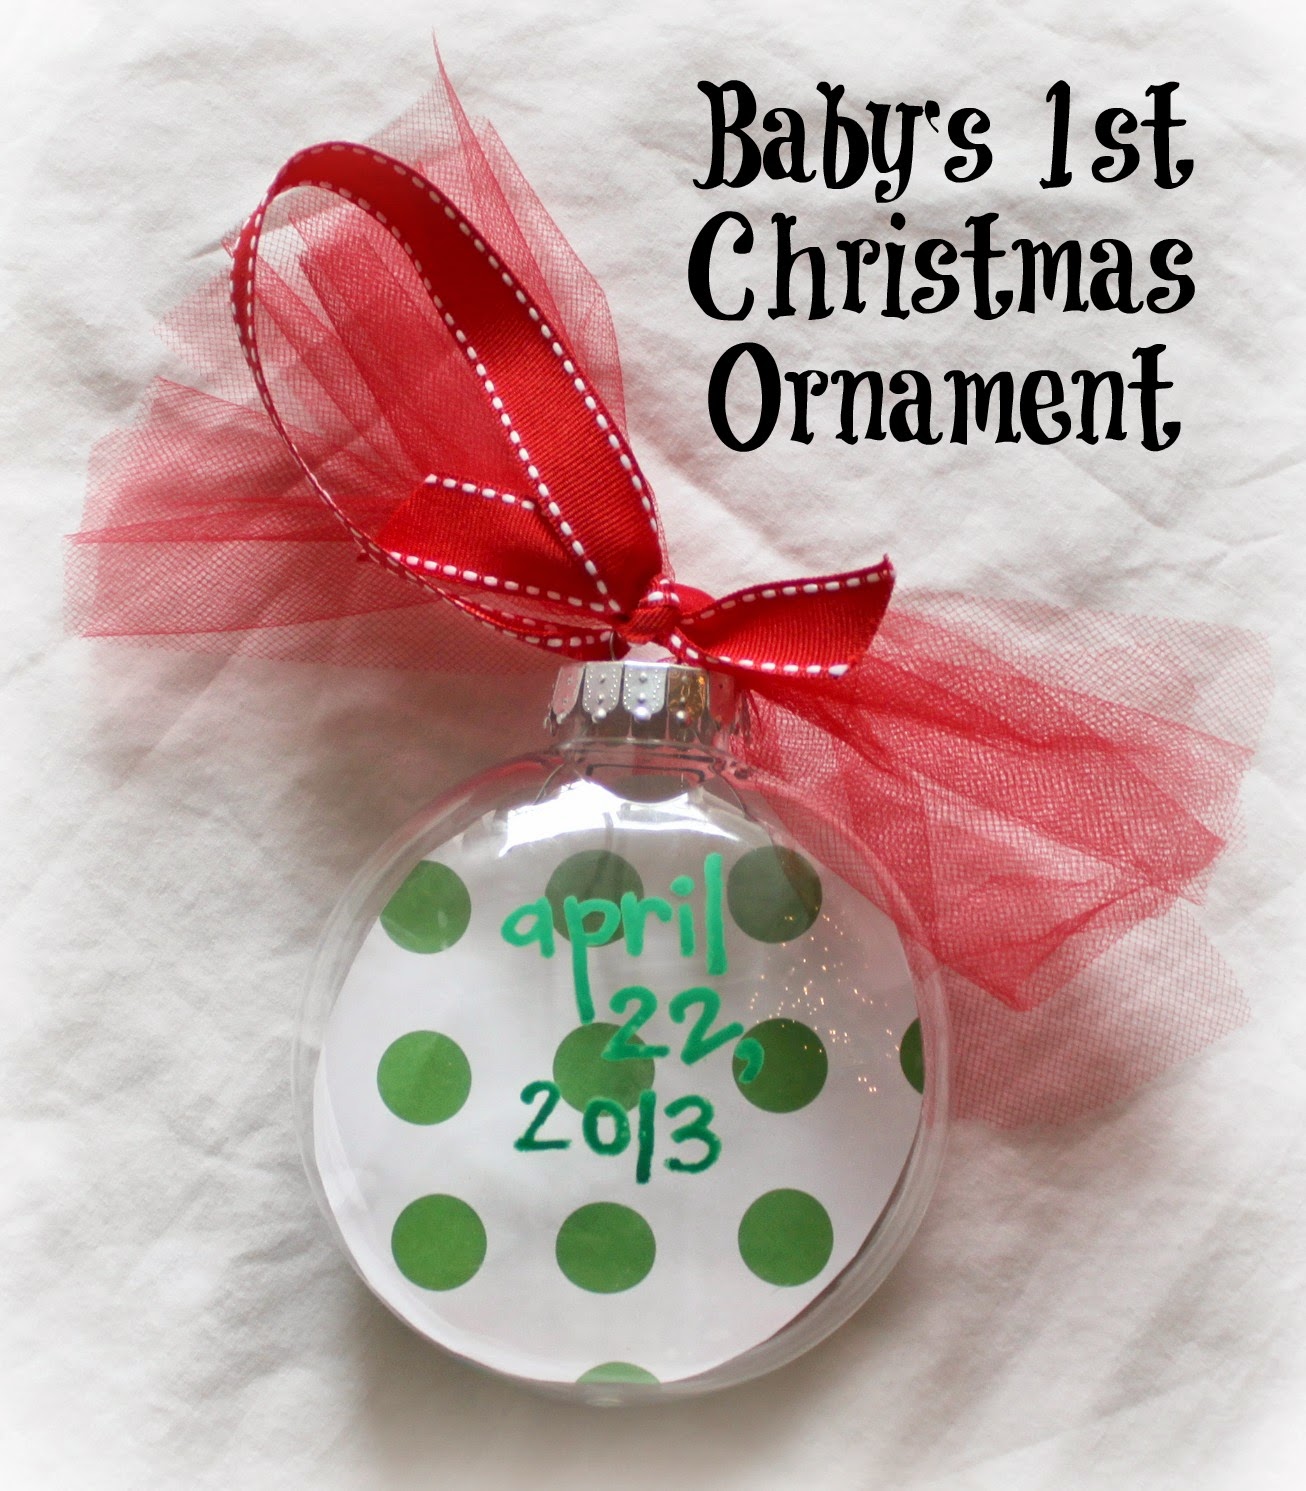 DIY, QUICK AND EASY INEXPENSIVE ORNAMENT, UNDER $2.00 TO MAKE